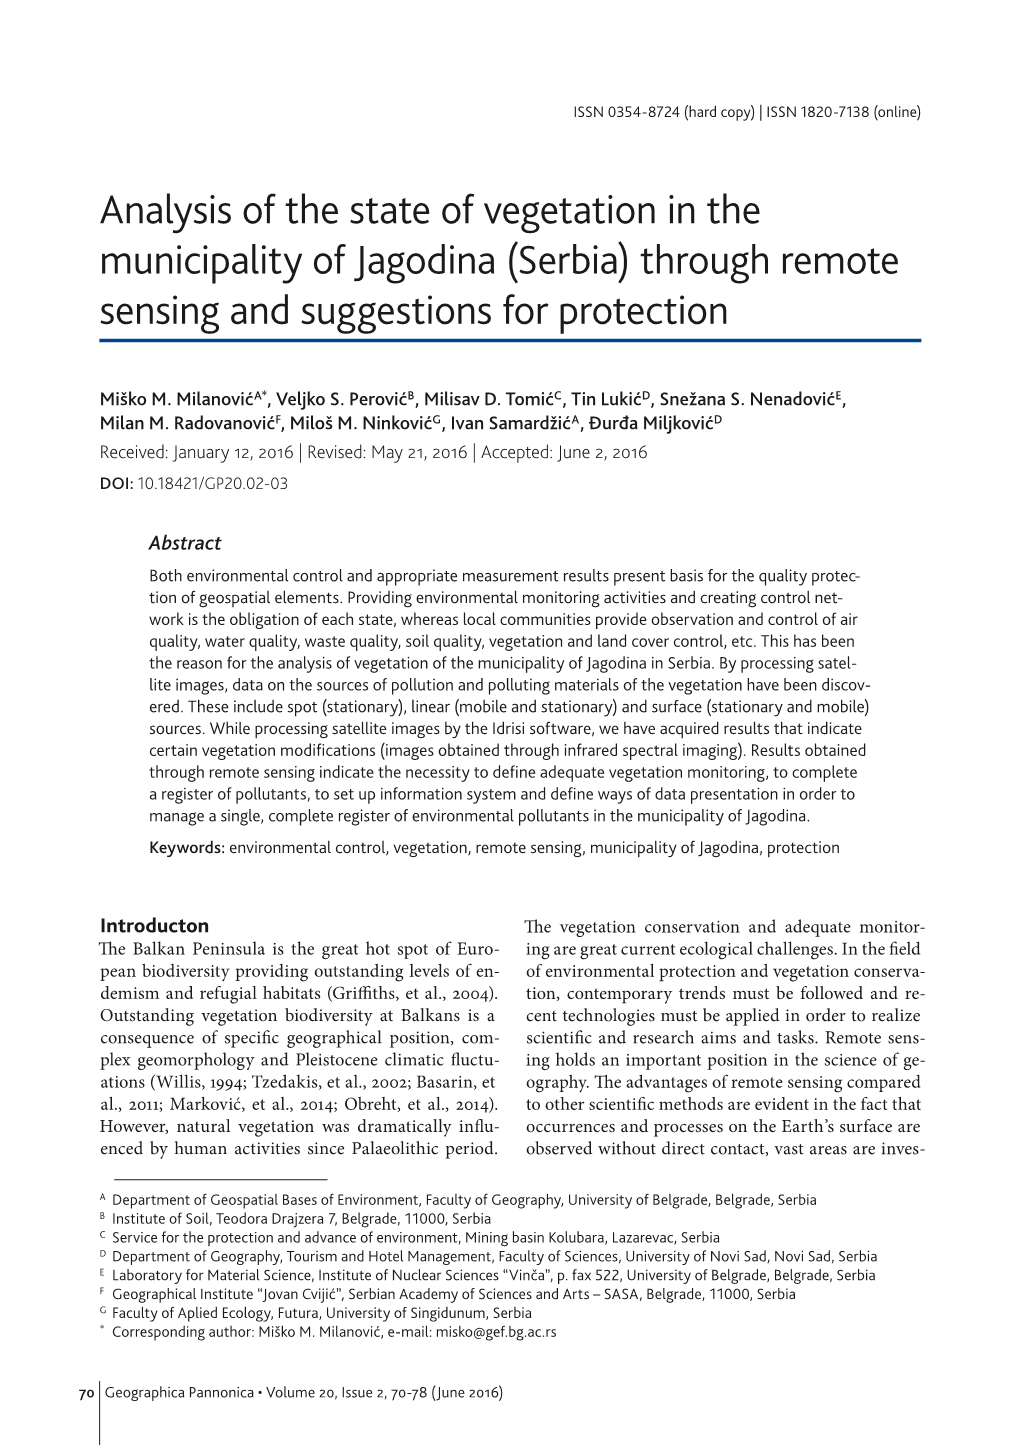 Analysis of the State of Vegetation in the Municipality of Jagodina (Serbia) Through Remote Sensing and Suggestions for Protection